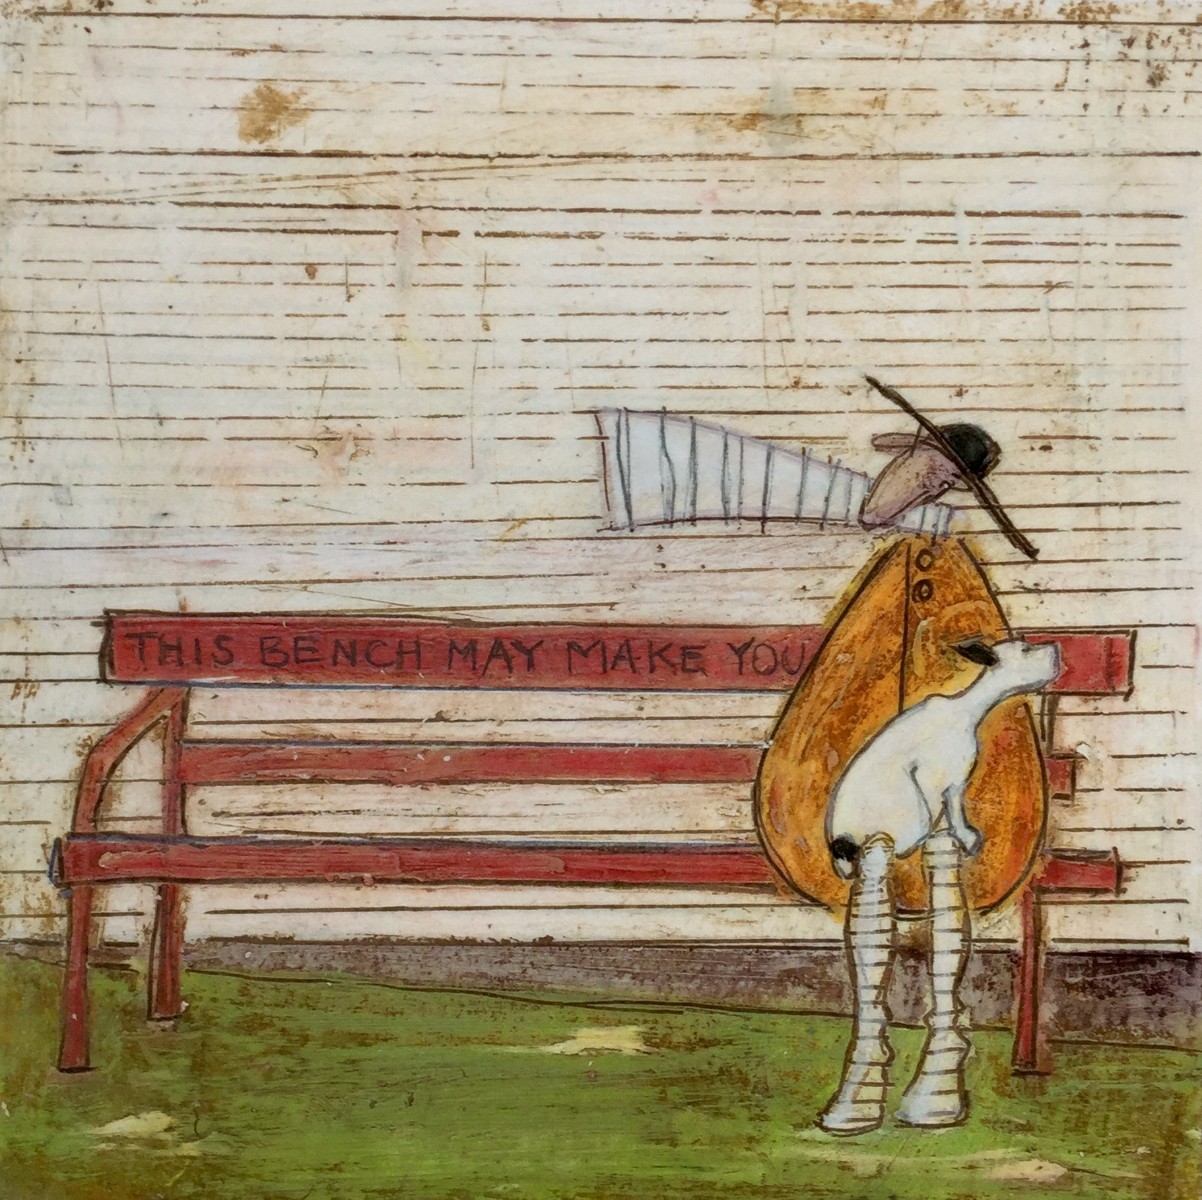 This Bench May Make You Happy! by Sam Toft